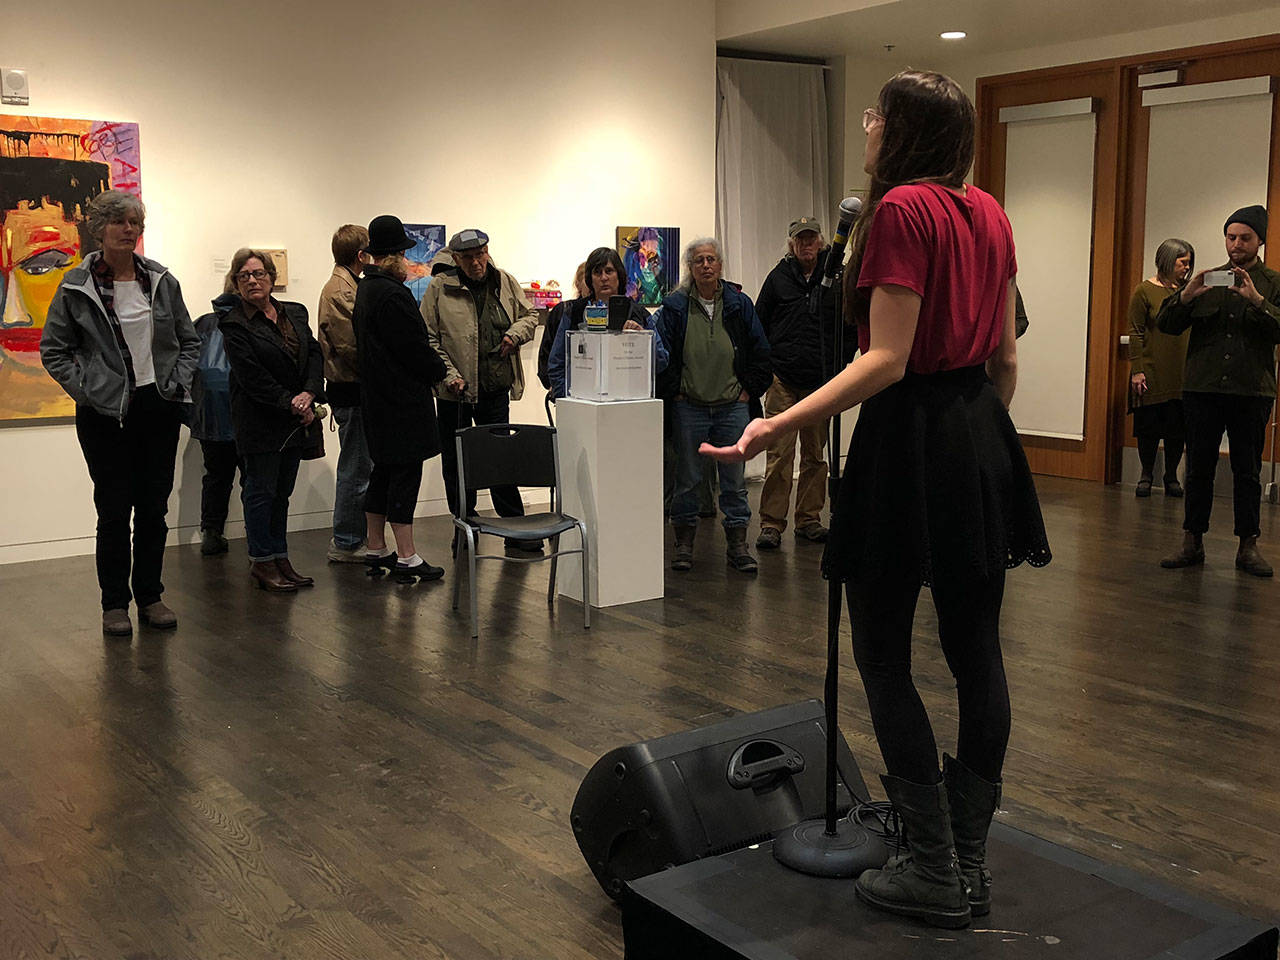 Emily Bruce, an islander, performed Eve Ensler’s monologue “My Short Skirt” at the opening of #MyMeToo, an exhibit that tackles responses to assault and abuse now running at Vashon Center for the Arts (Tom Hughes Photo).